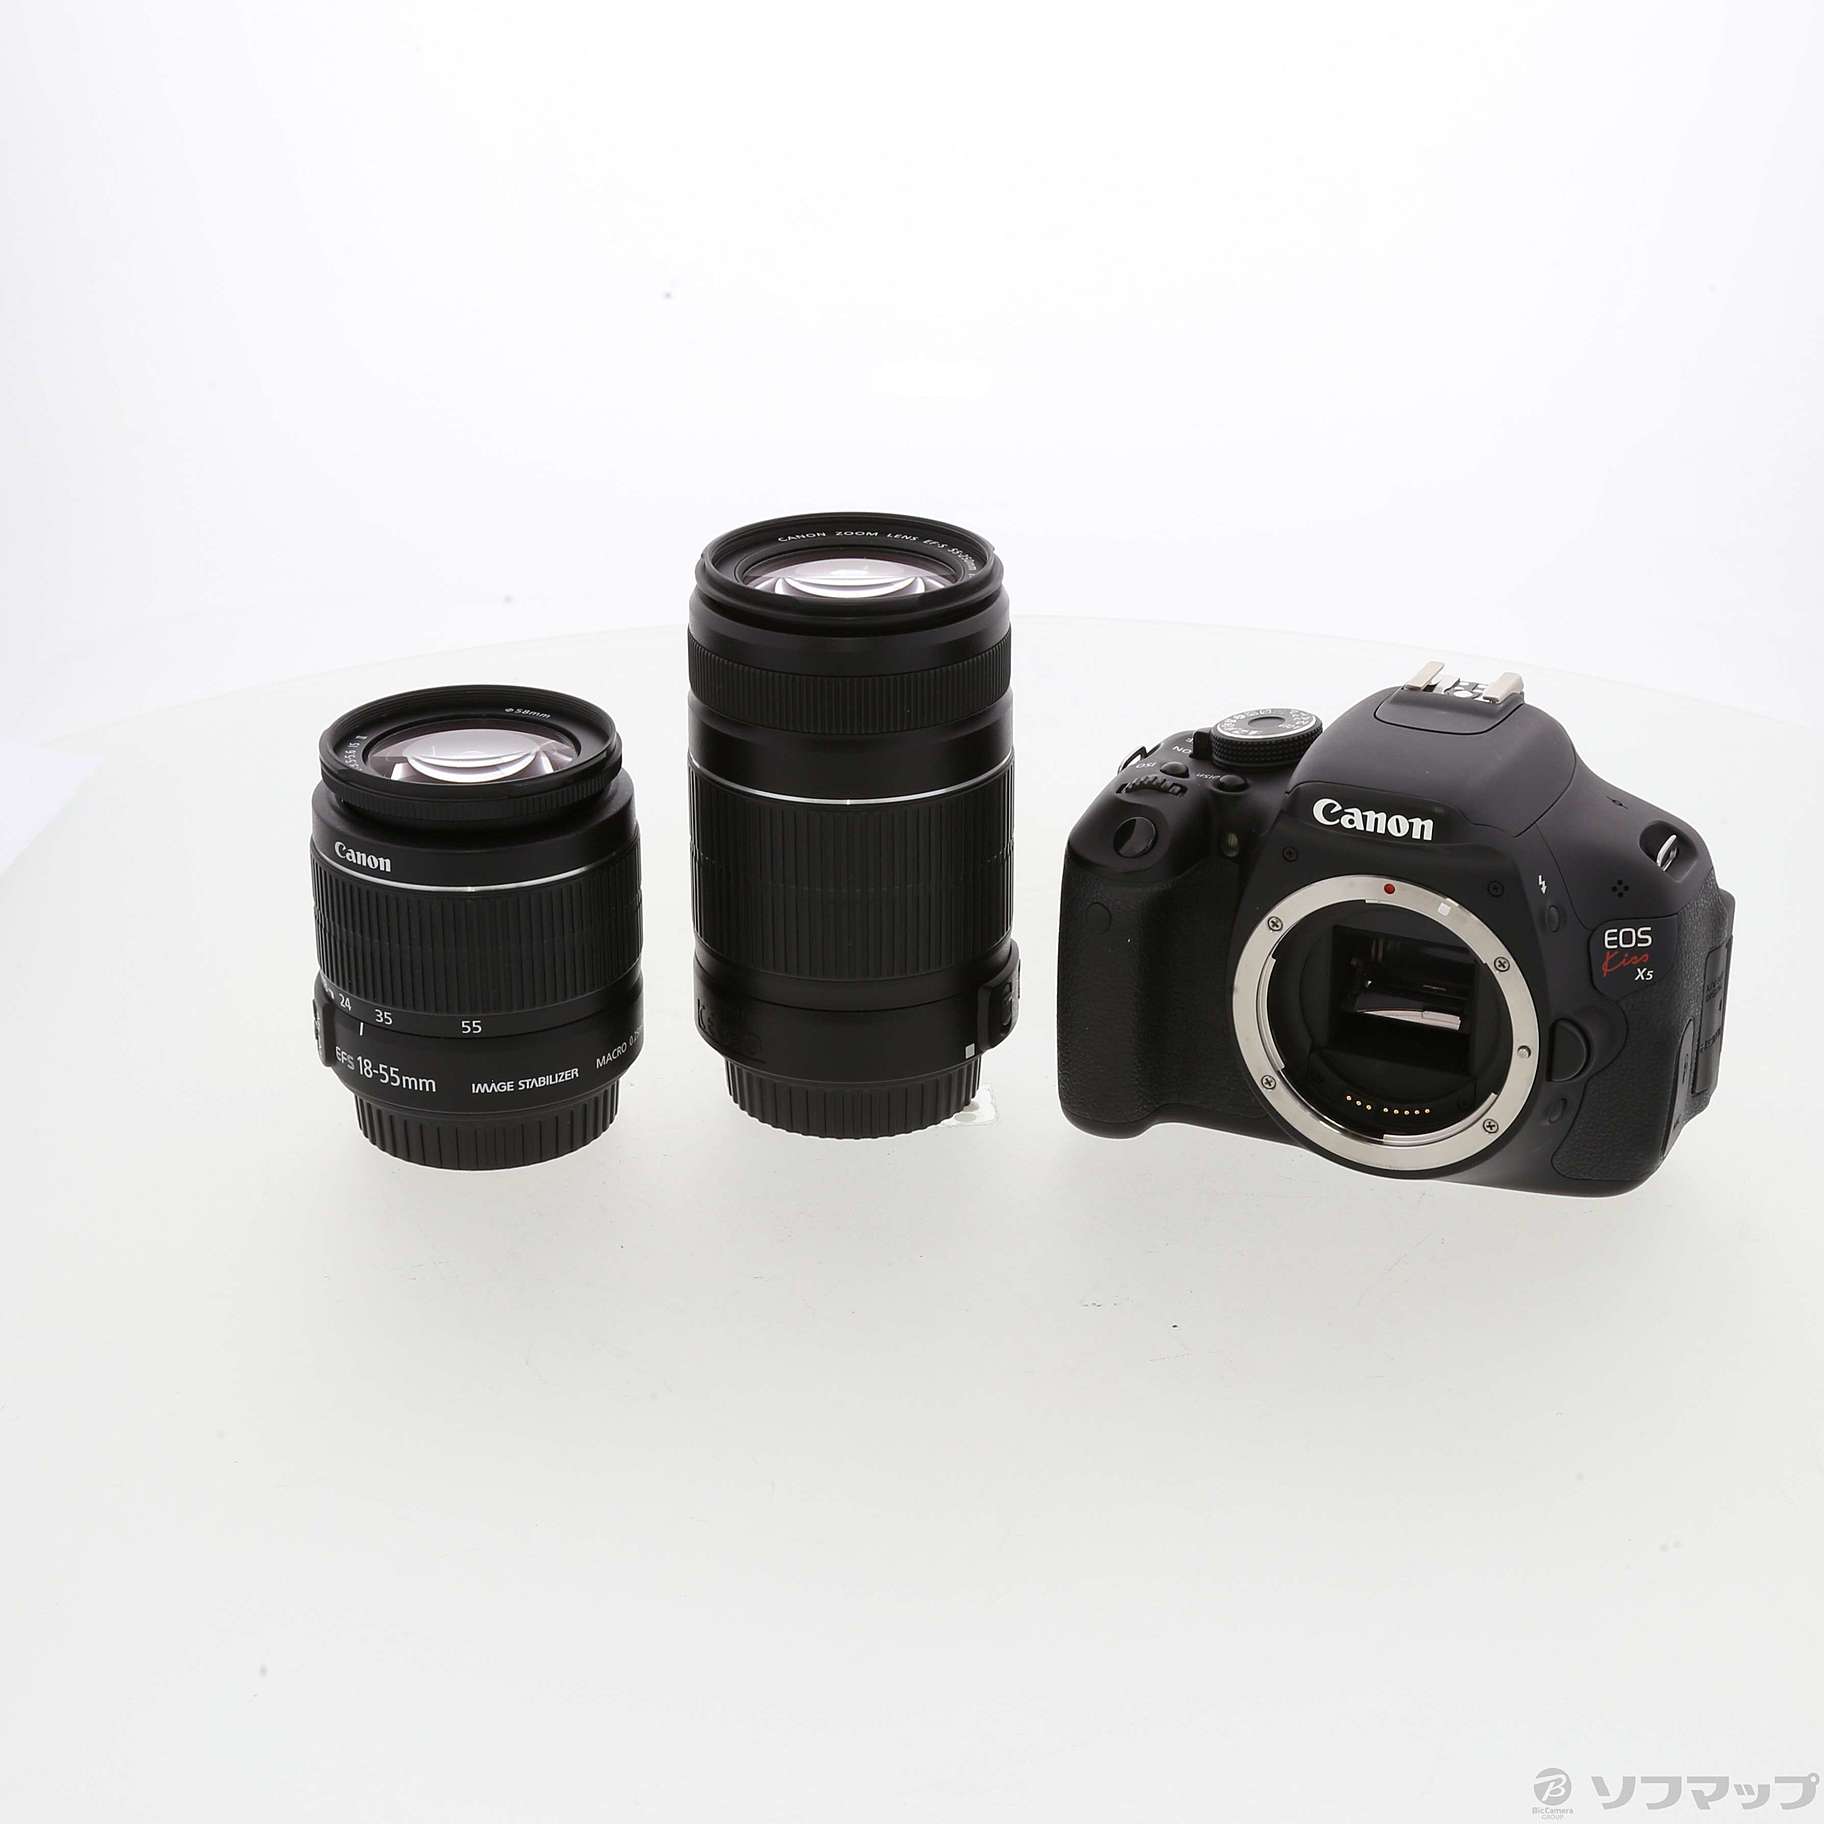 Canon EOS KISS X5 Wズームキット-